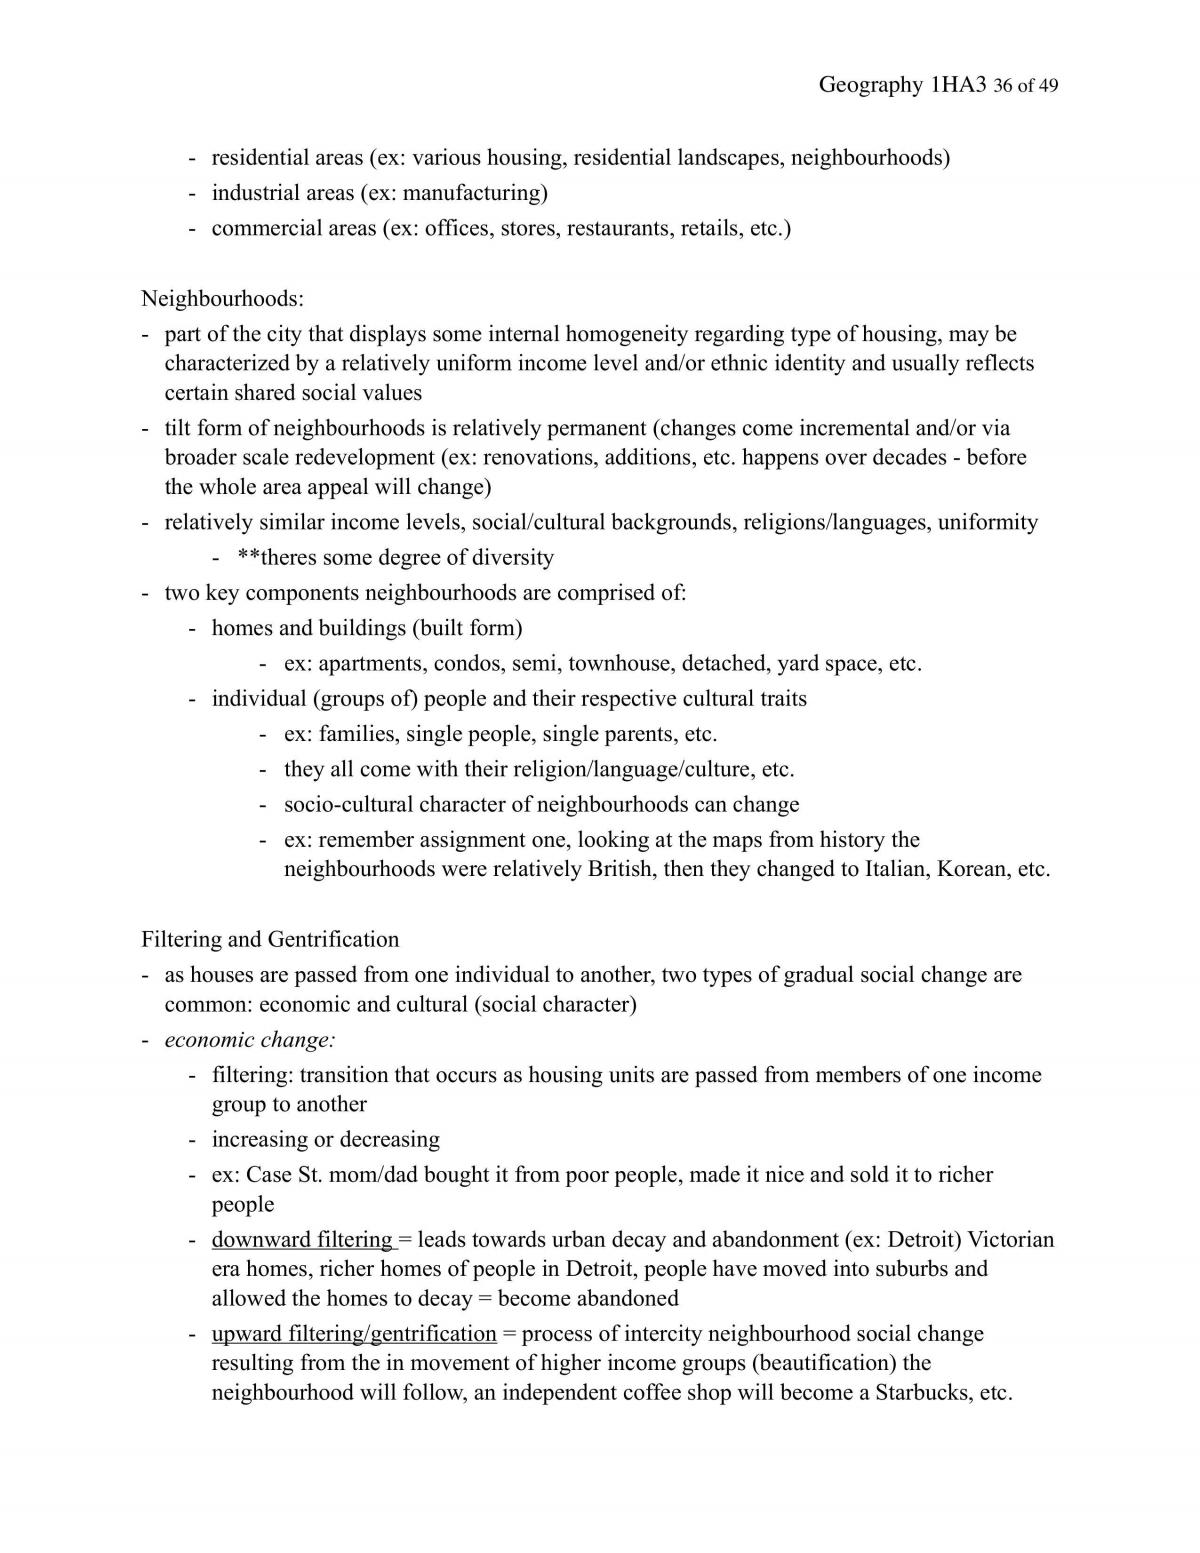 Society, Culture and Environment Entire Course Notes - Page 36